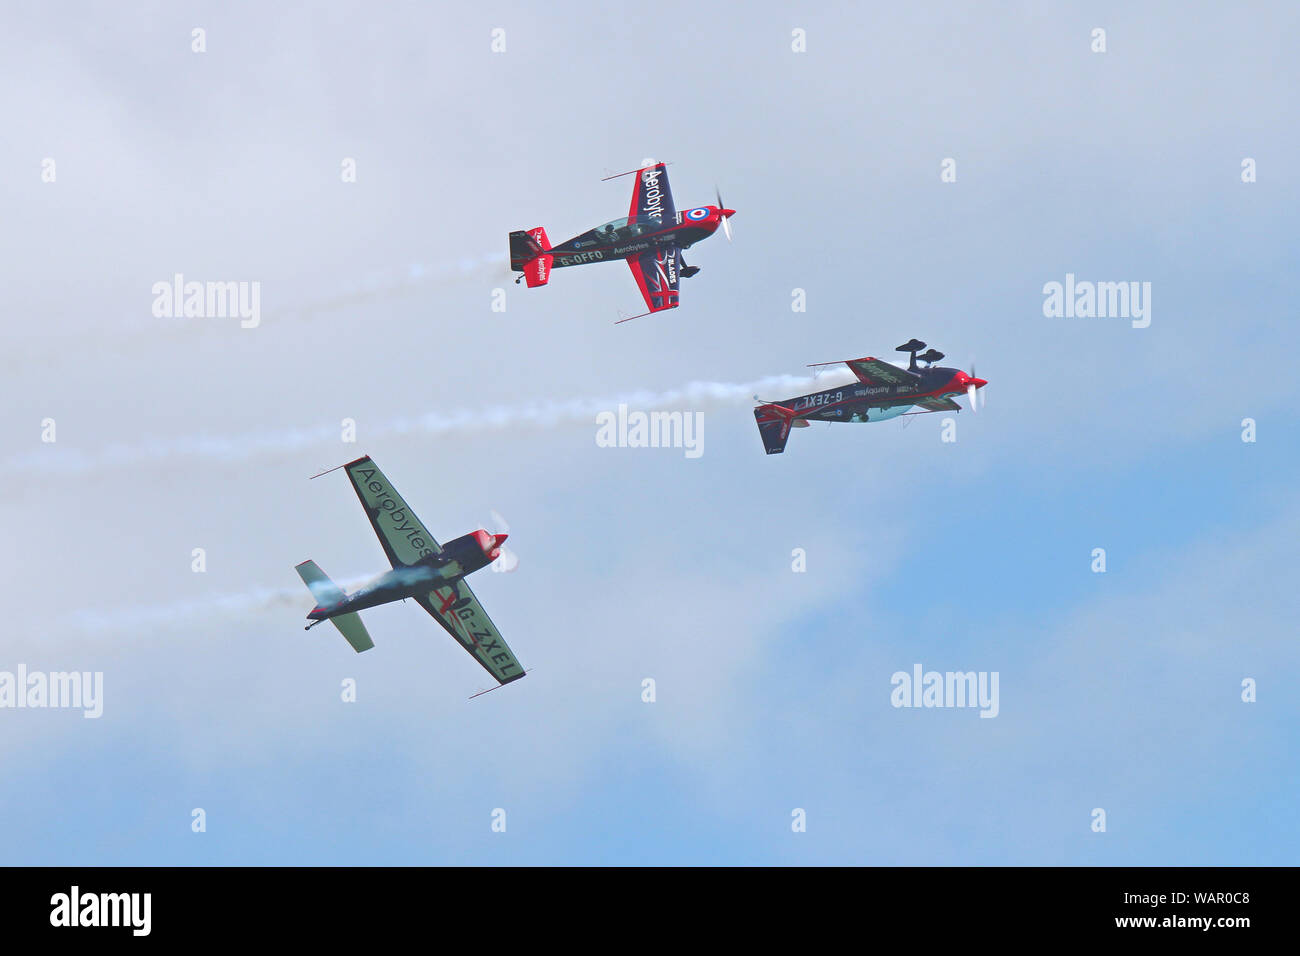 Three of the Blades Aerobatics Team perform this amazing stunt for the crowds at Eastbourne's International Airshow in August 2019. Stock Photo